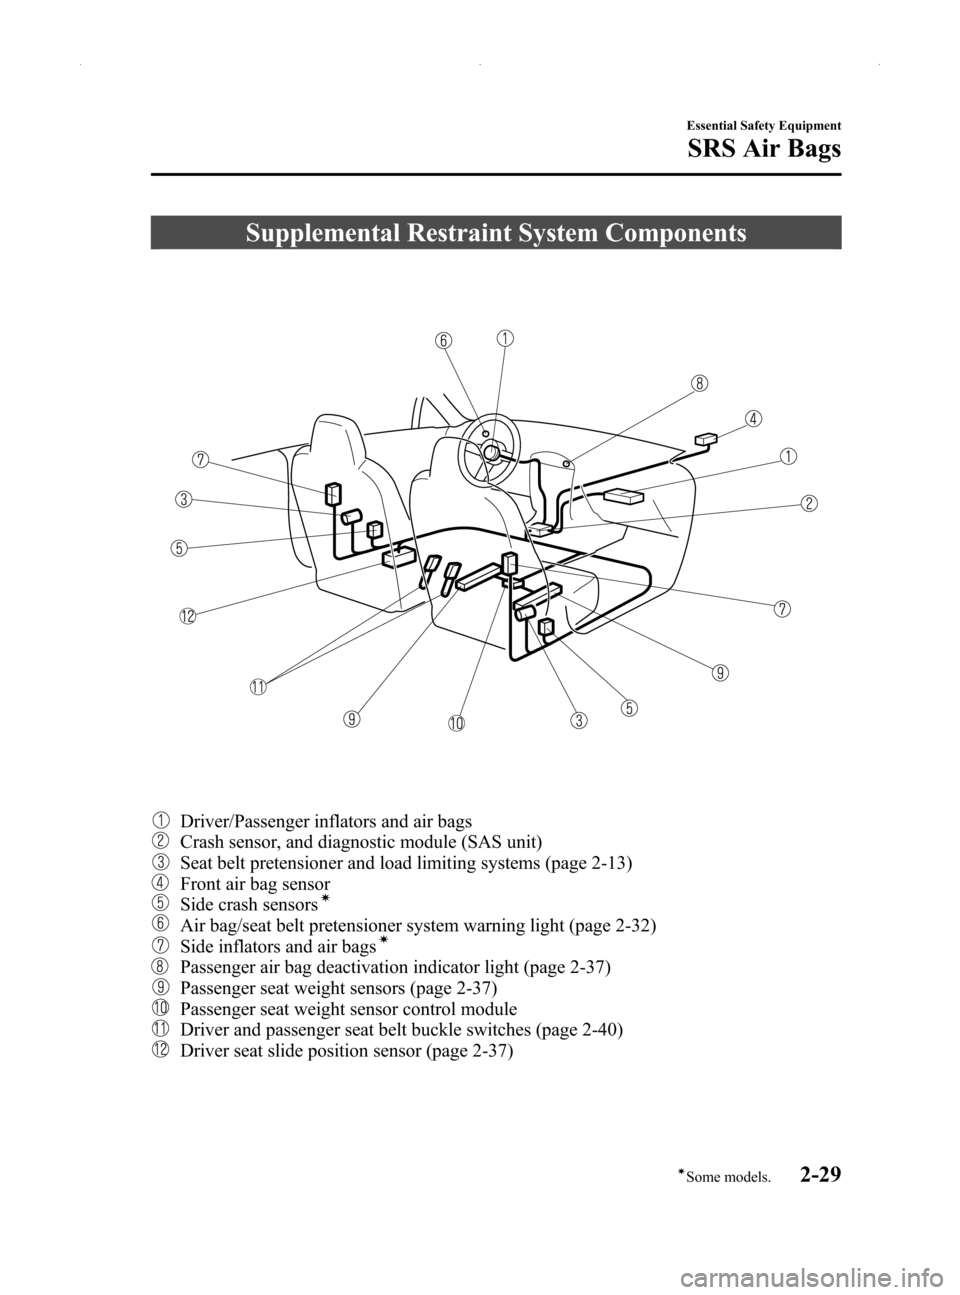 MAZDA MODEL MX-5 2014  Owners Manual (in English) Black plate (41,1)
Supplemental Restraint System Components
Driver/Passenger inflators and air bags
Crash sensor, and diagnostic module (SAS unit)
Seat belt pretensioner and load limiting systems (pag